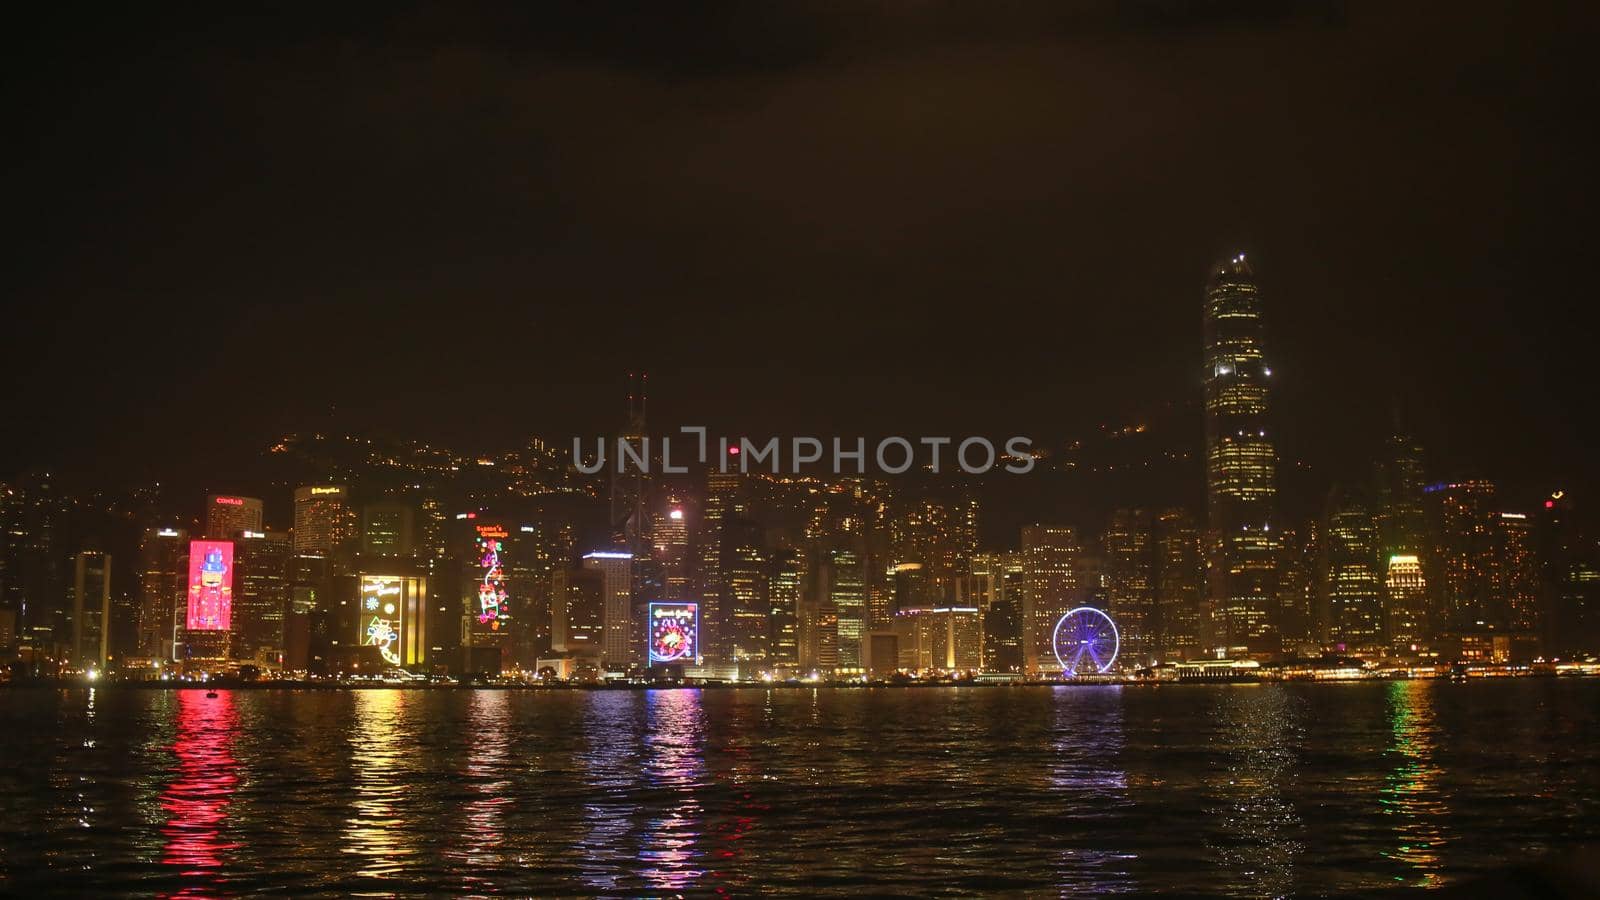 City of Hong Kong at night. Multicolored lights illuminating buildings in the reflection of the sea. Beautiful city view